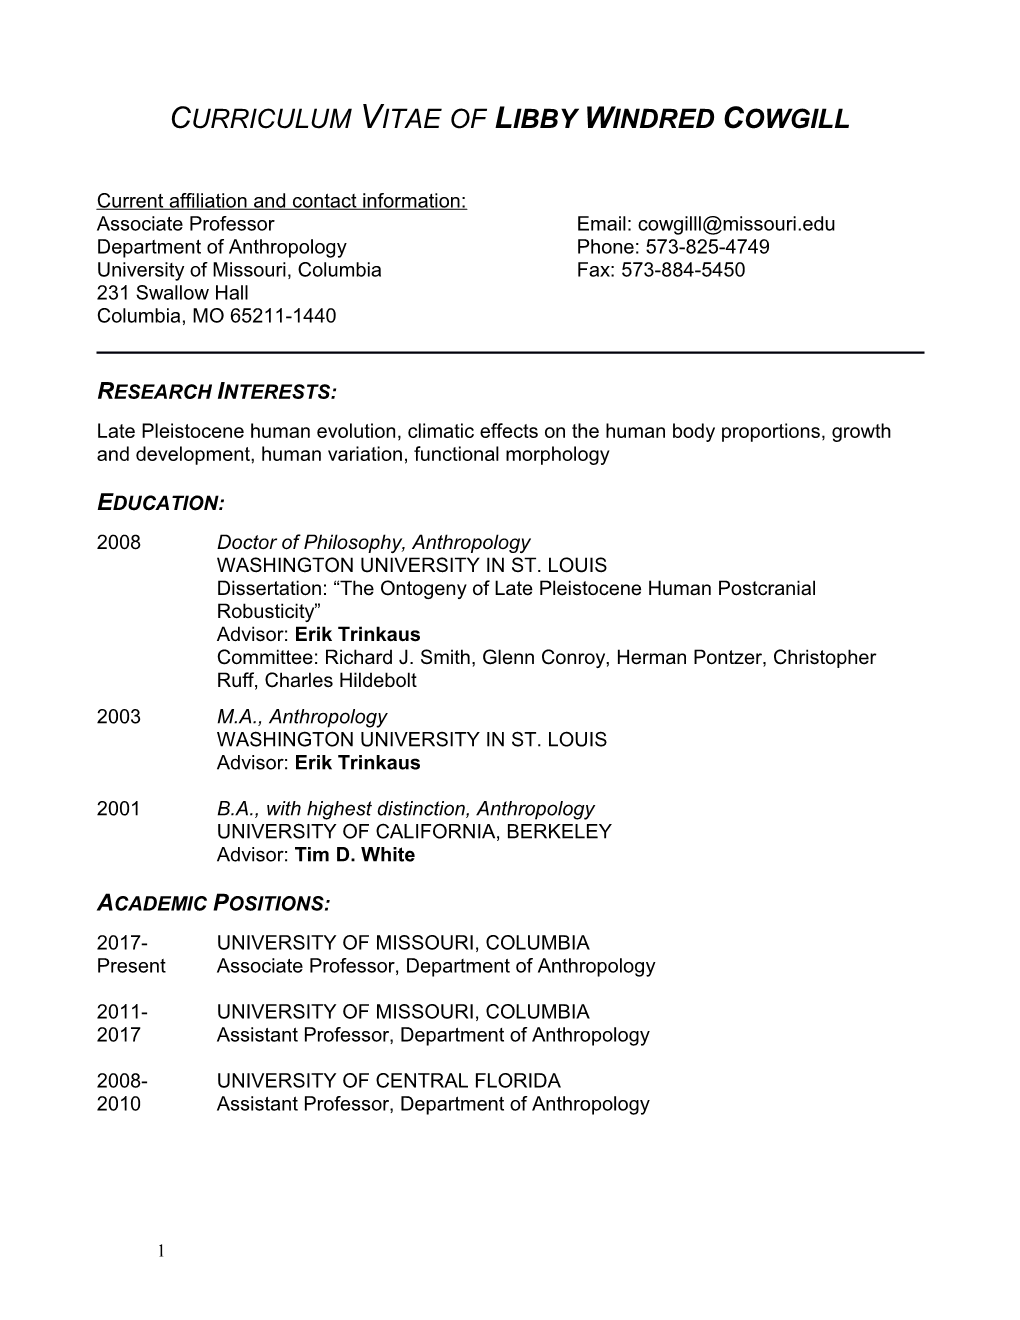 Curriculum Vitae of Libby Windred Cowgill